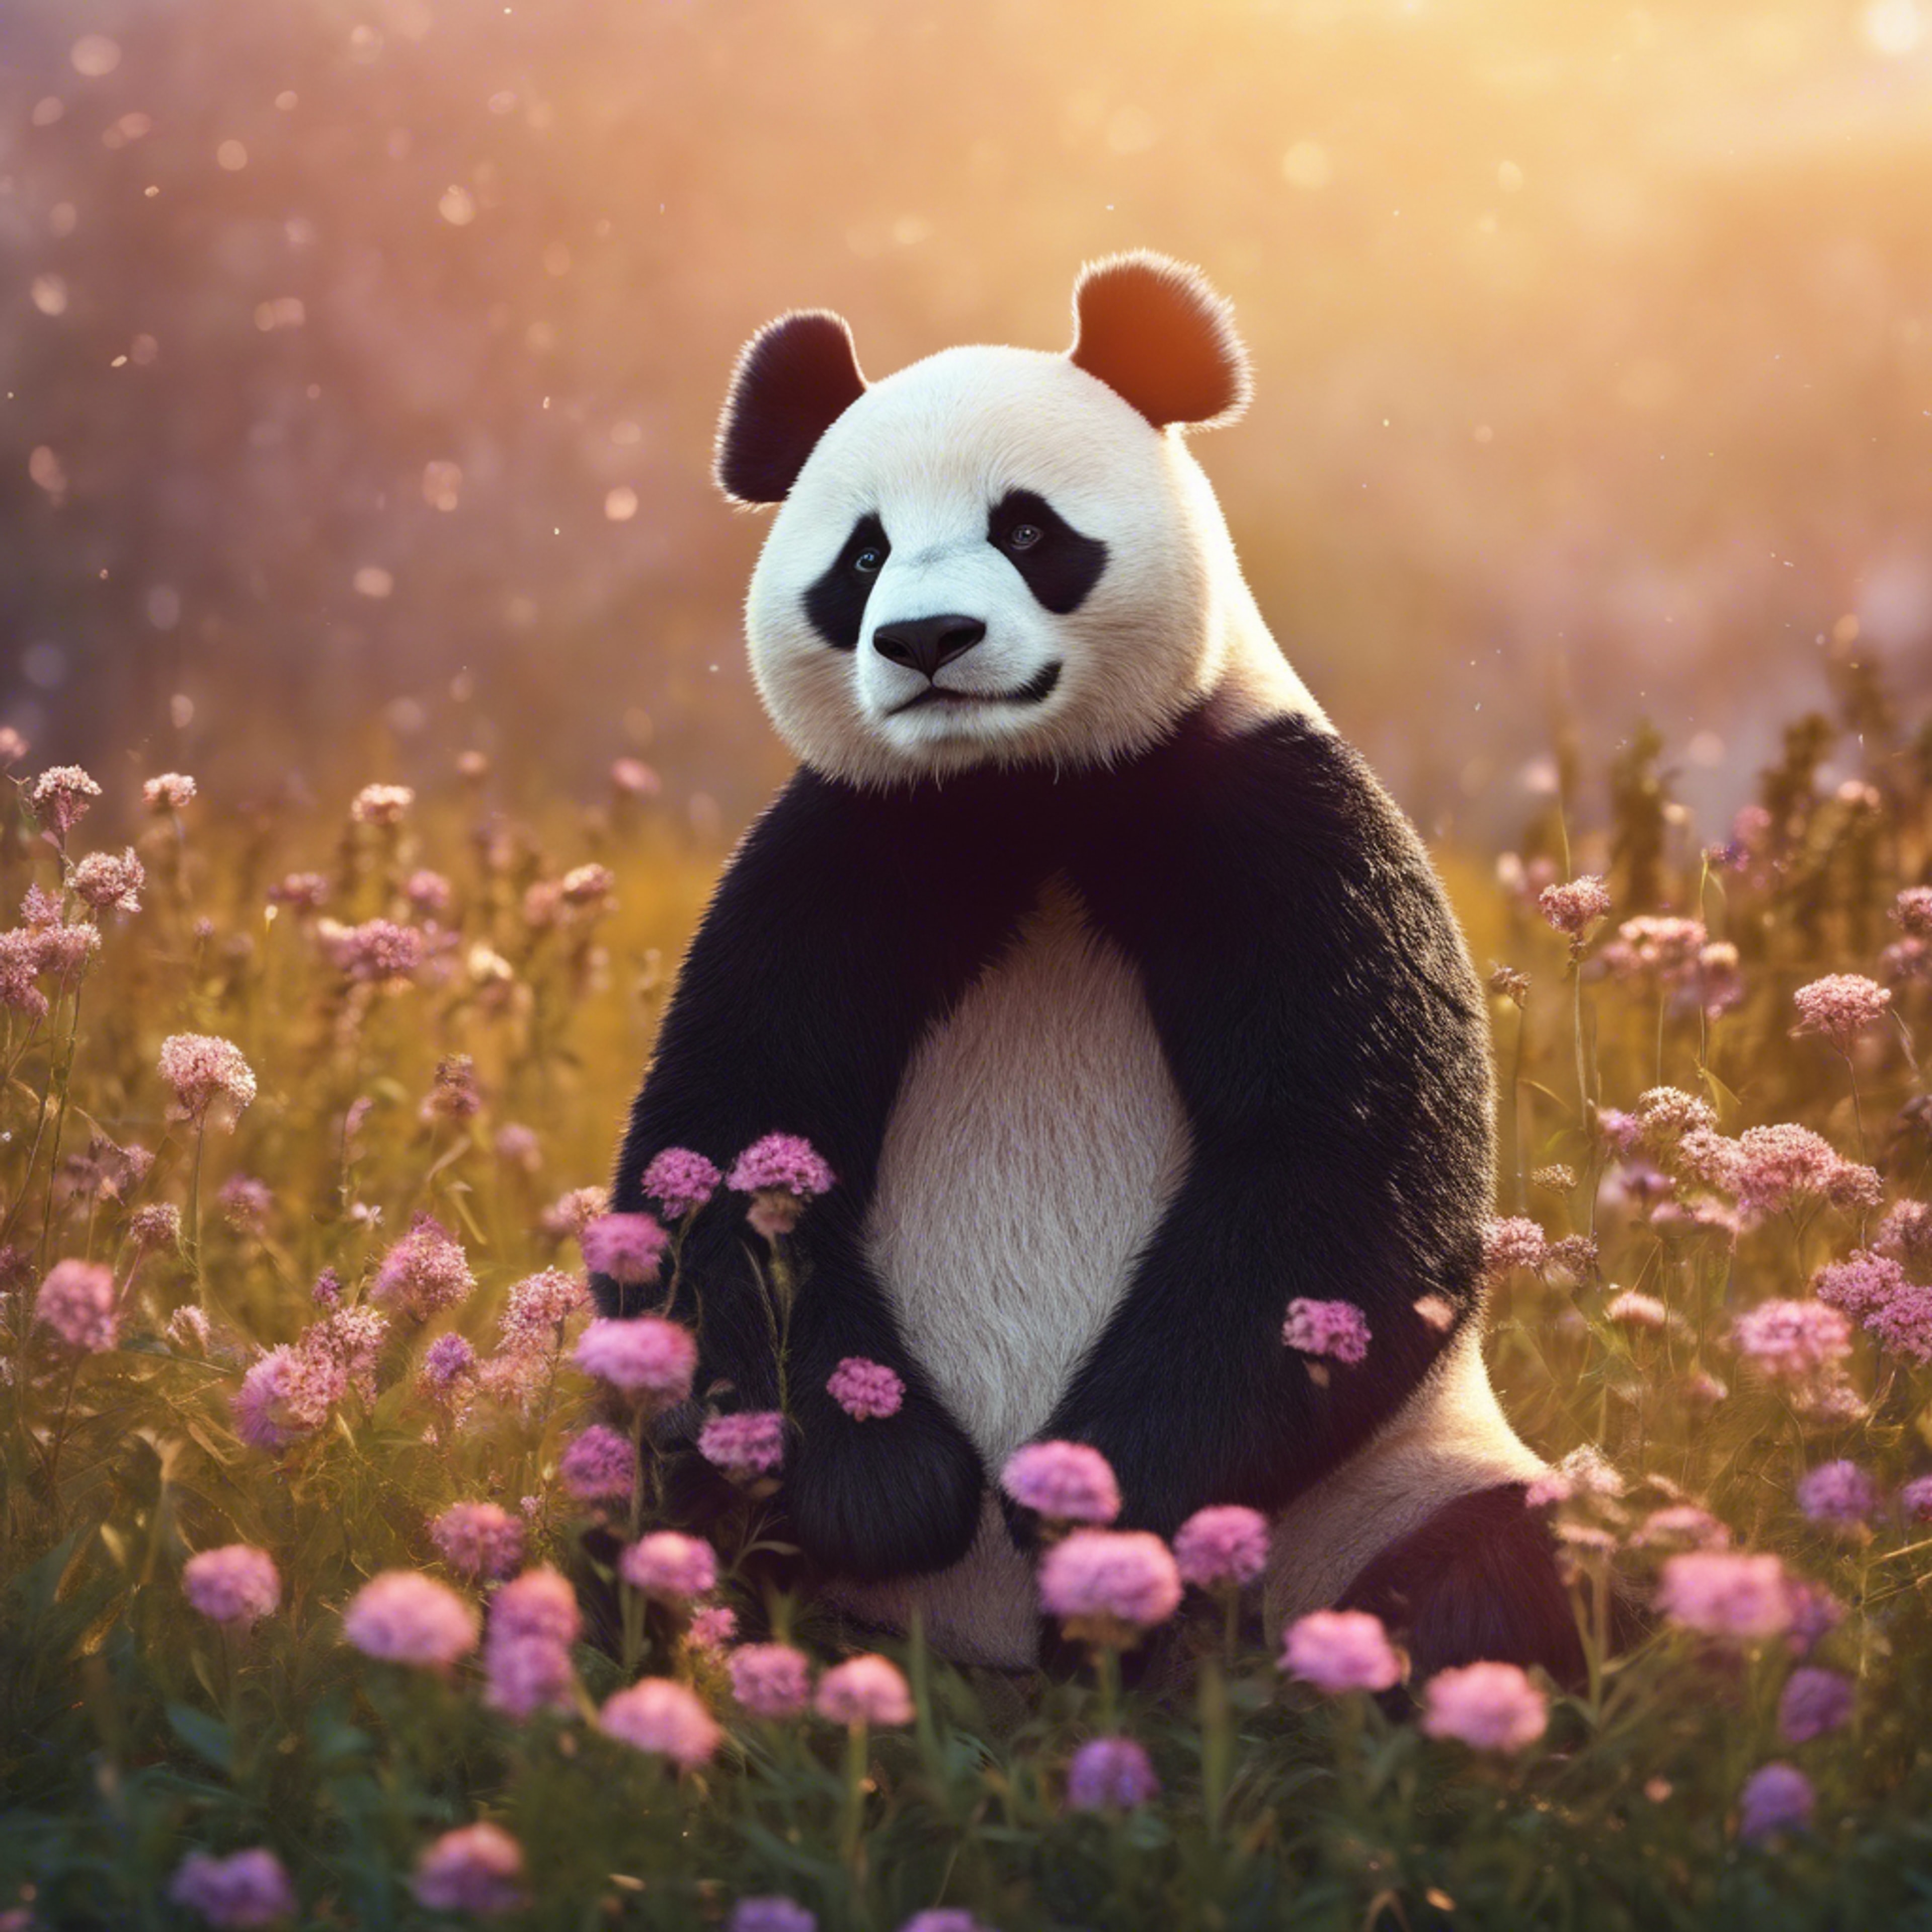 Beautiful illustration of a panda relaxing under the glow of the setting sun, surrounded by a field of wildflowers. Tapet[4e88d1ee586942fa837d]